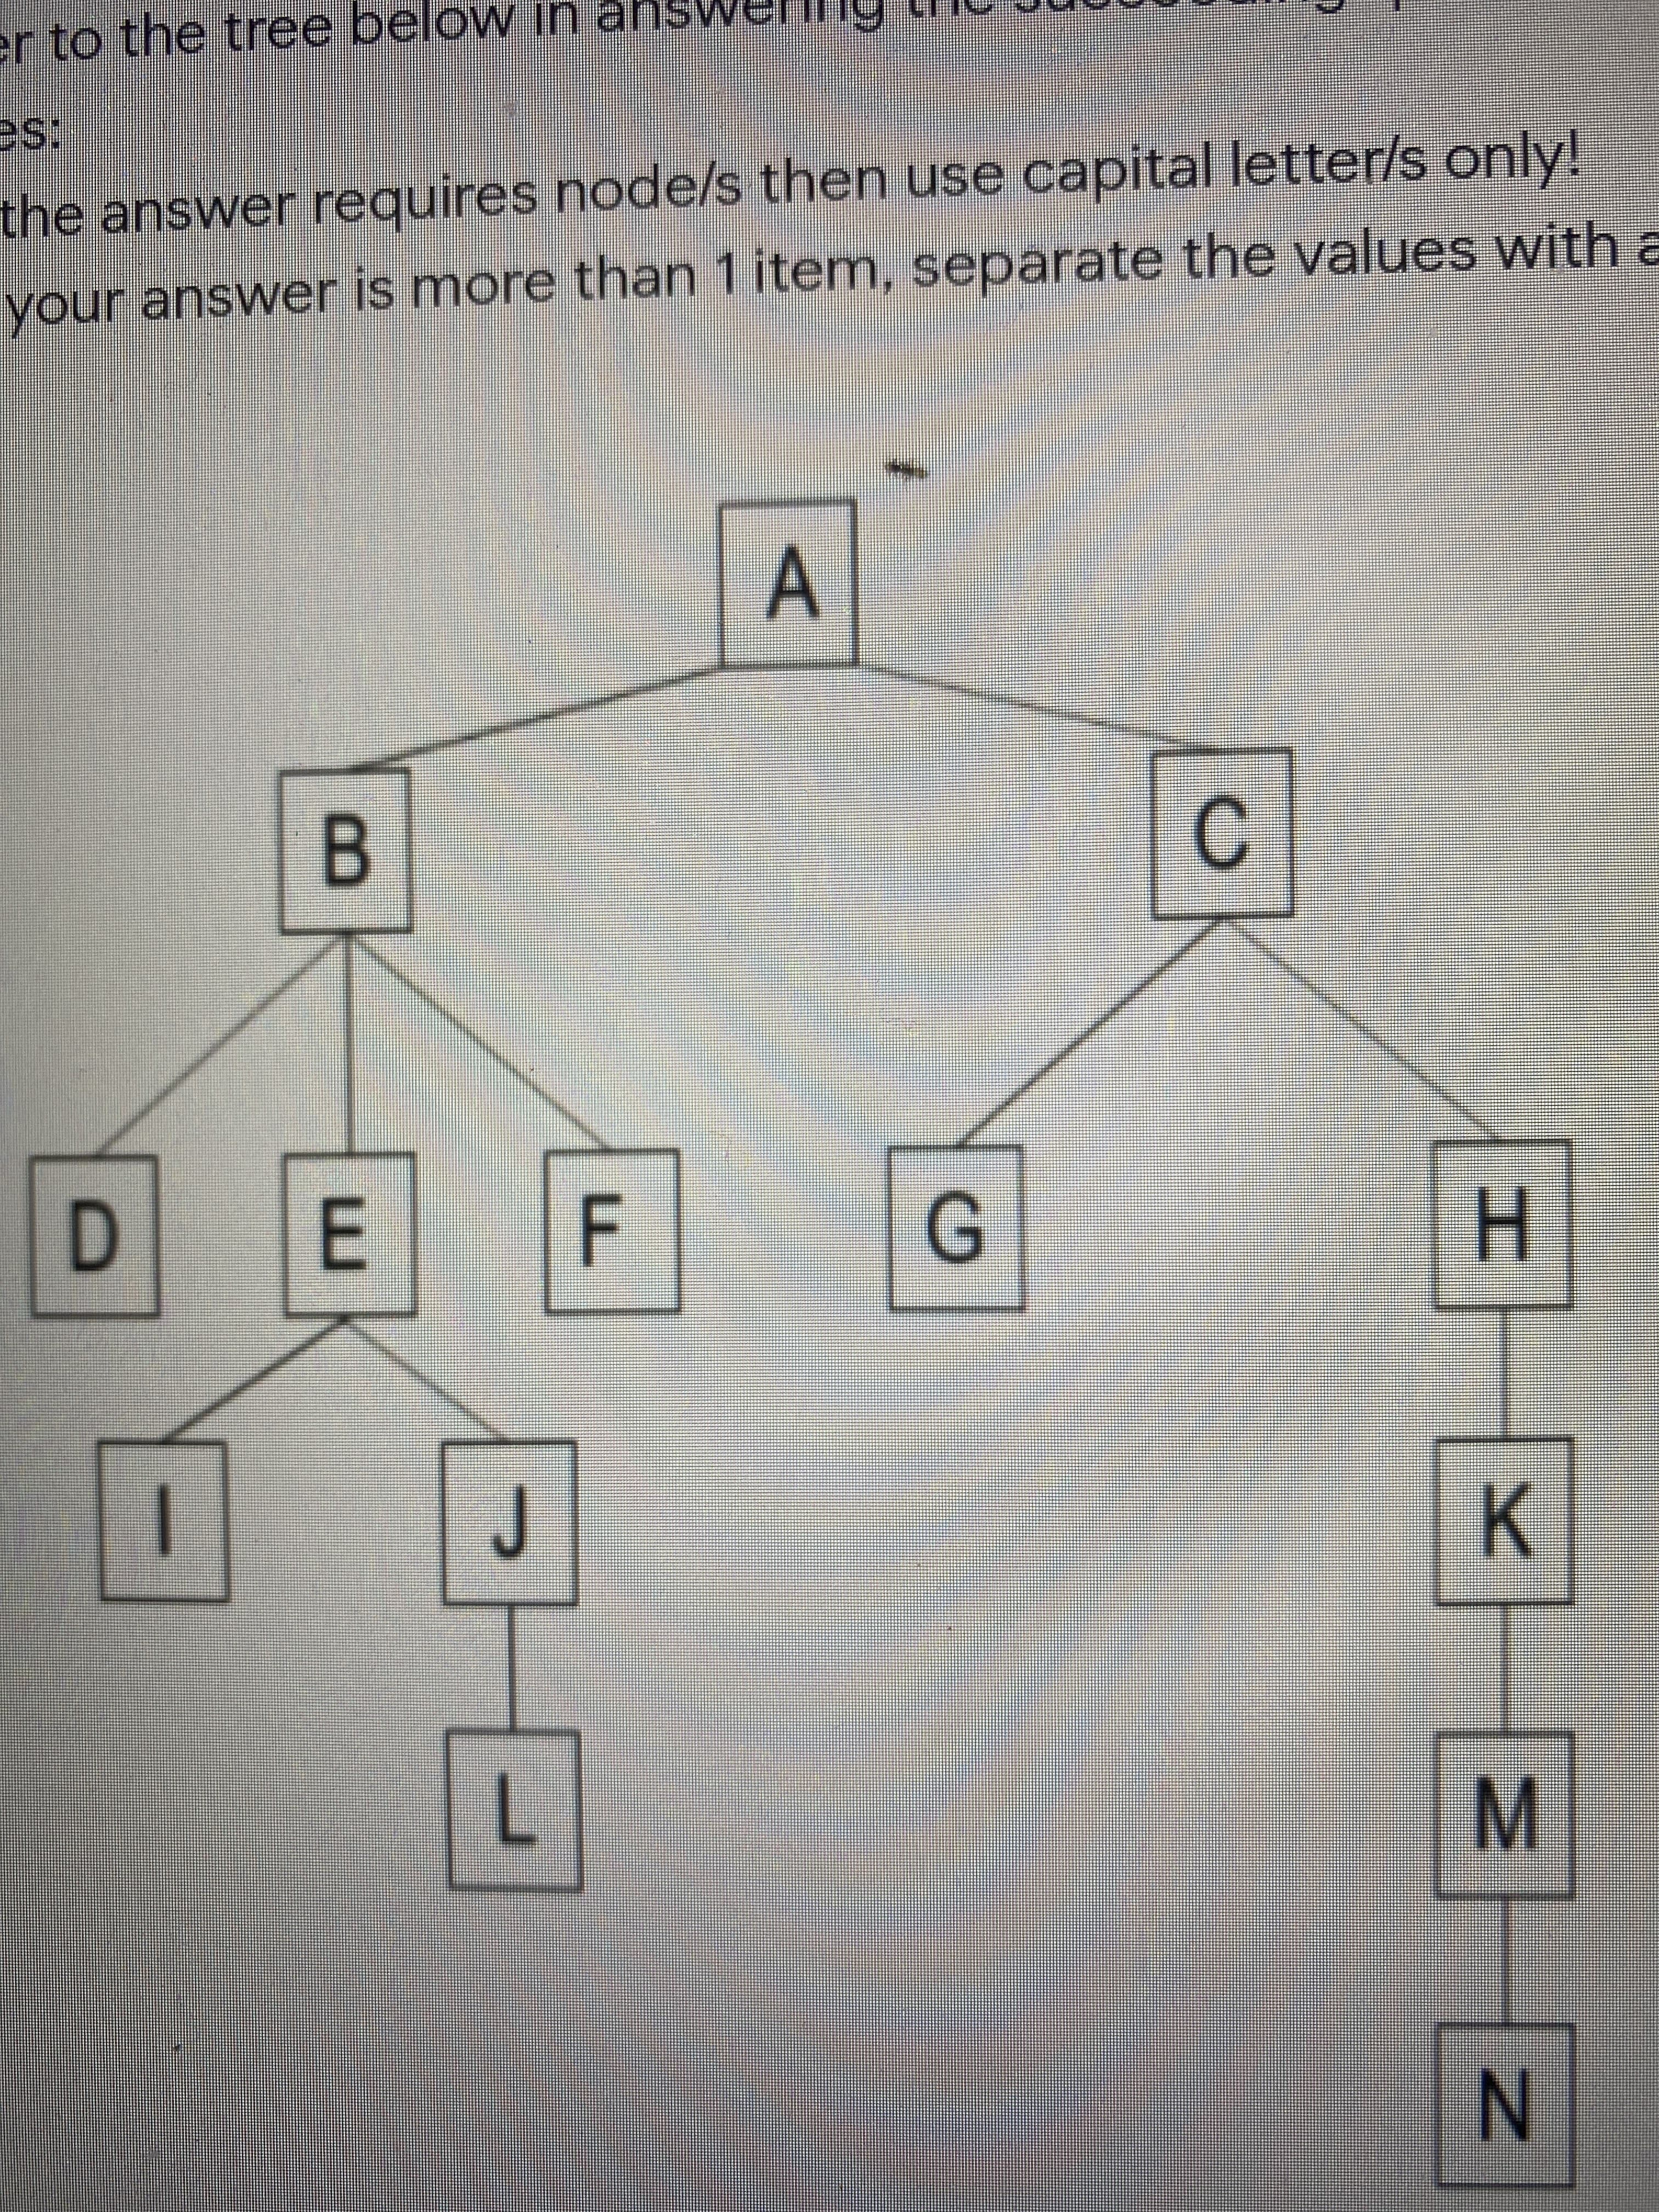 F.
E.
N
N
K.
エ
B.
your answer is more than 1 item, separate the values witha
the answer requires node/s then use capital letter/s only!
er to the tree below in ahsW
